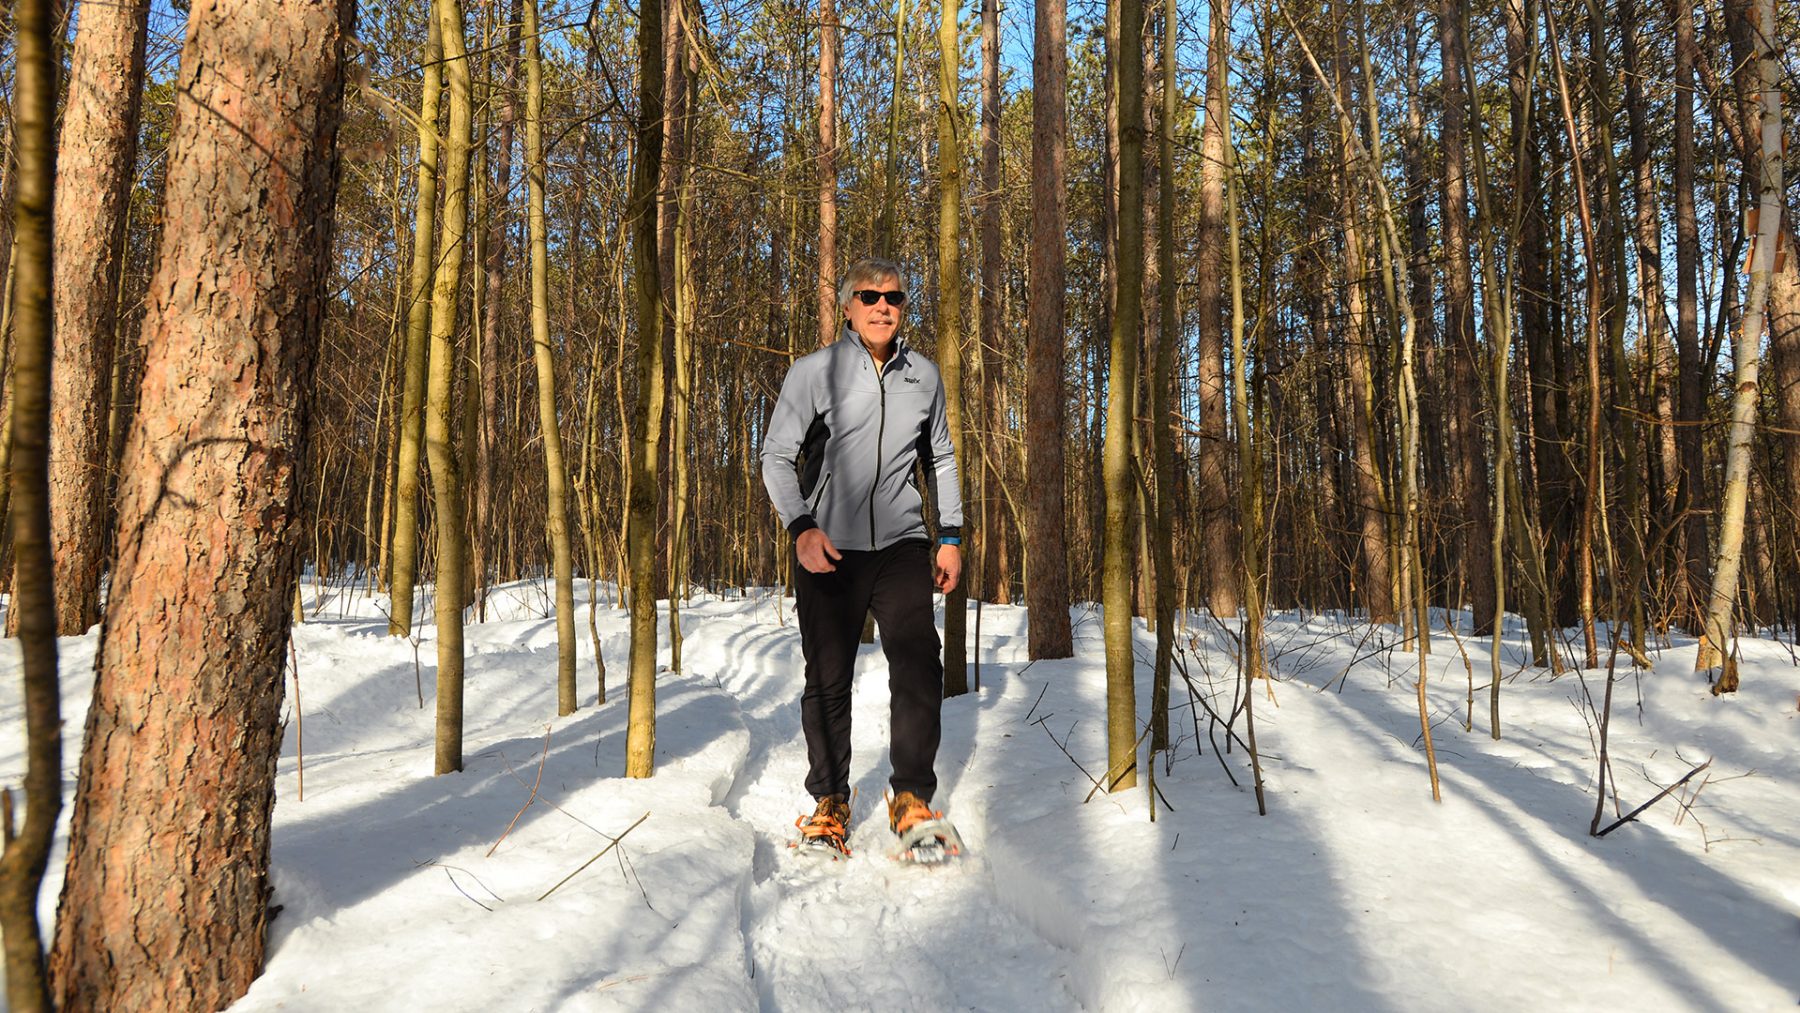 Article: Snowshoeing the Ice Age Trail | Snowshoeing the Ice Age Trail in Rusk County WI